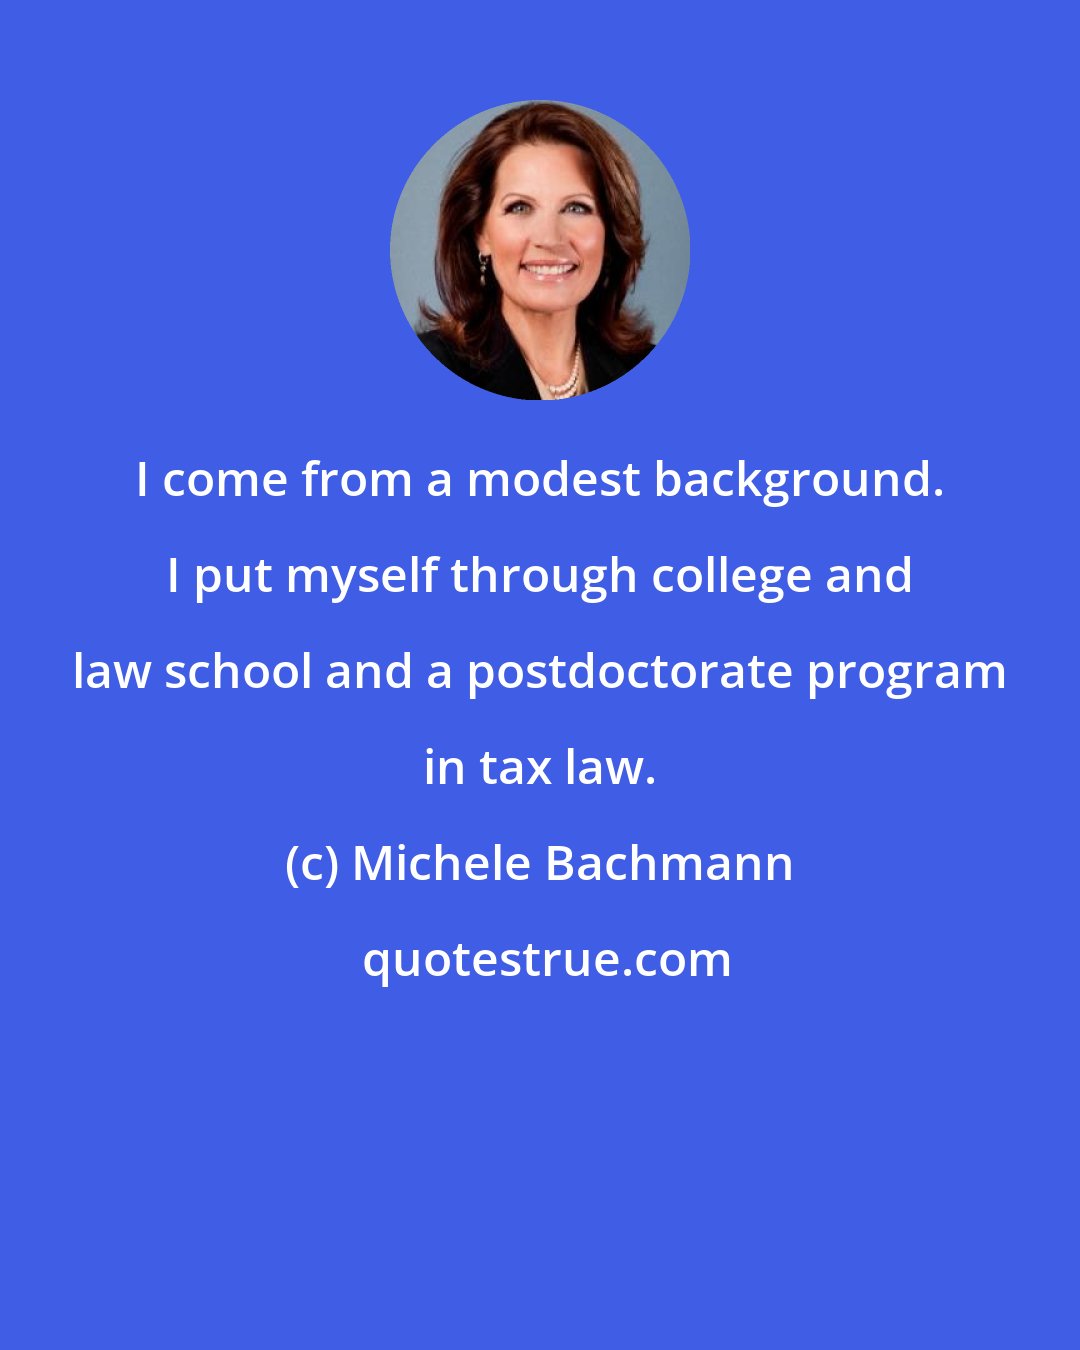 Michele Bachmann: I come from a modest background. I put myself through college and law school and a postdoctorate program in tax law.